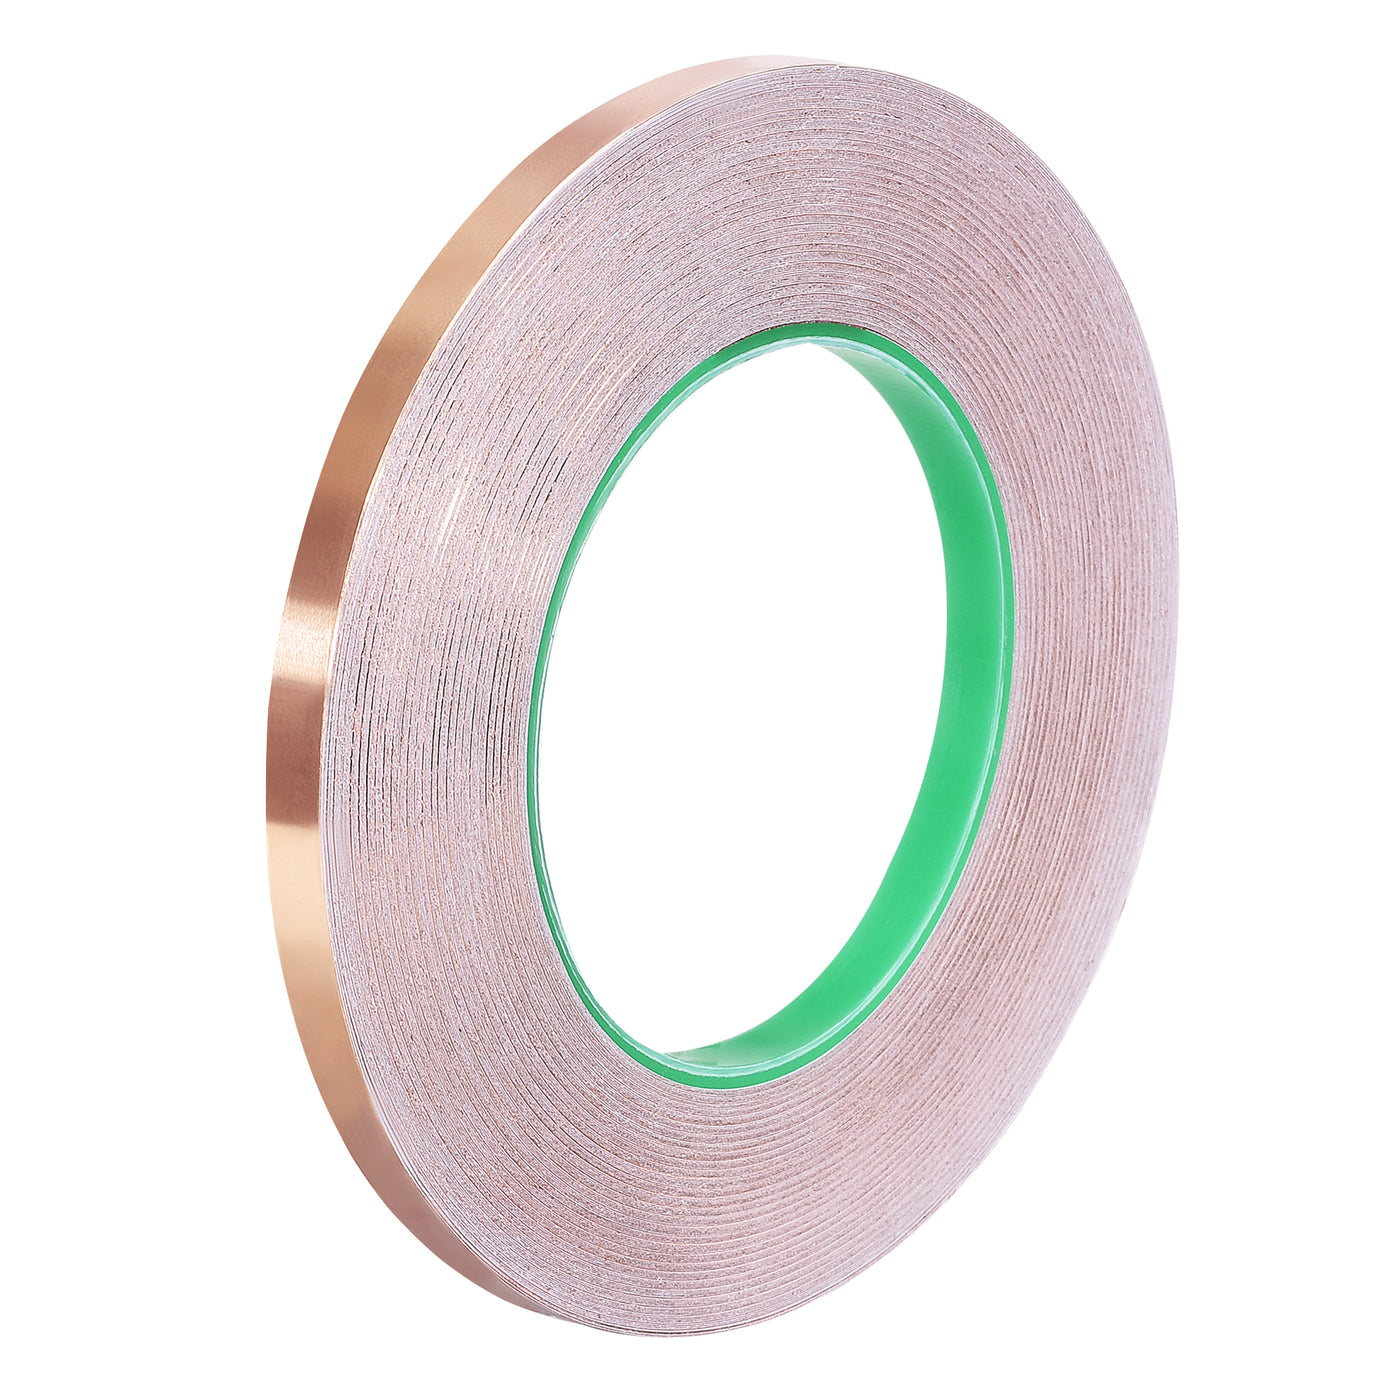 Uxcell Uxcell Double-Sided Conductive Tape Copper Foil Tape 12mm x 50m/164ft for EMI Shielding 1pcs